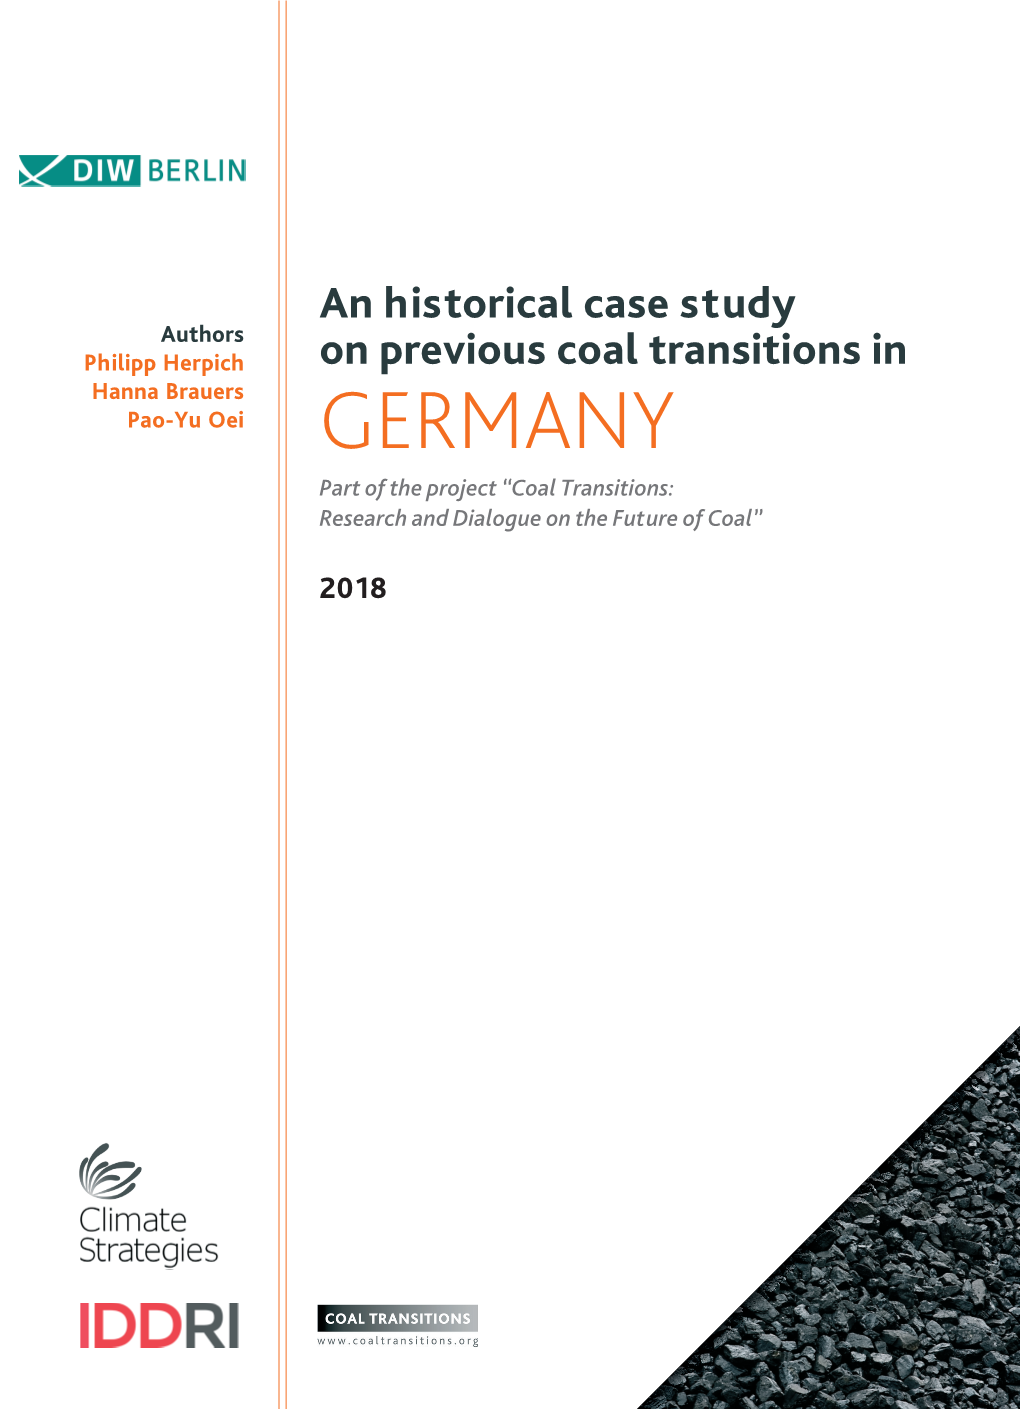 An Historical Case Study on Previous Coal Transitions in GERMANY